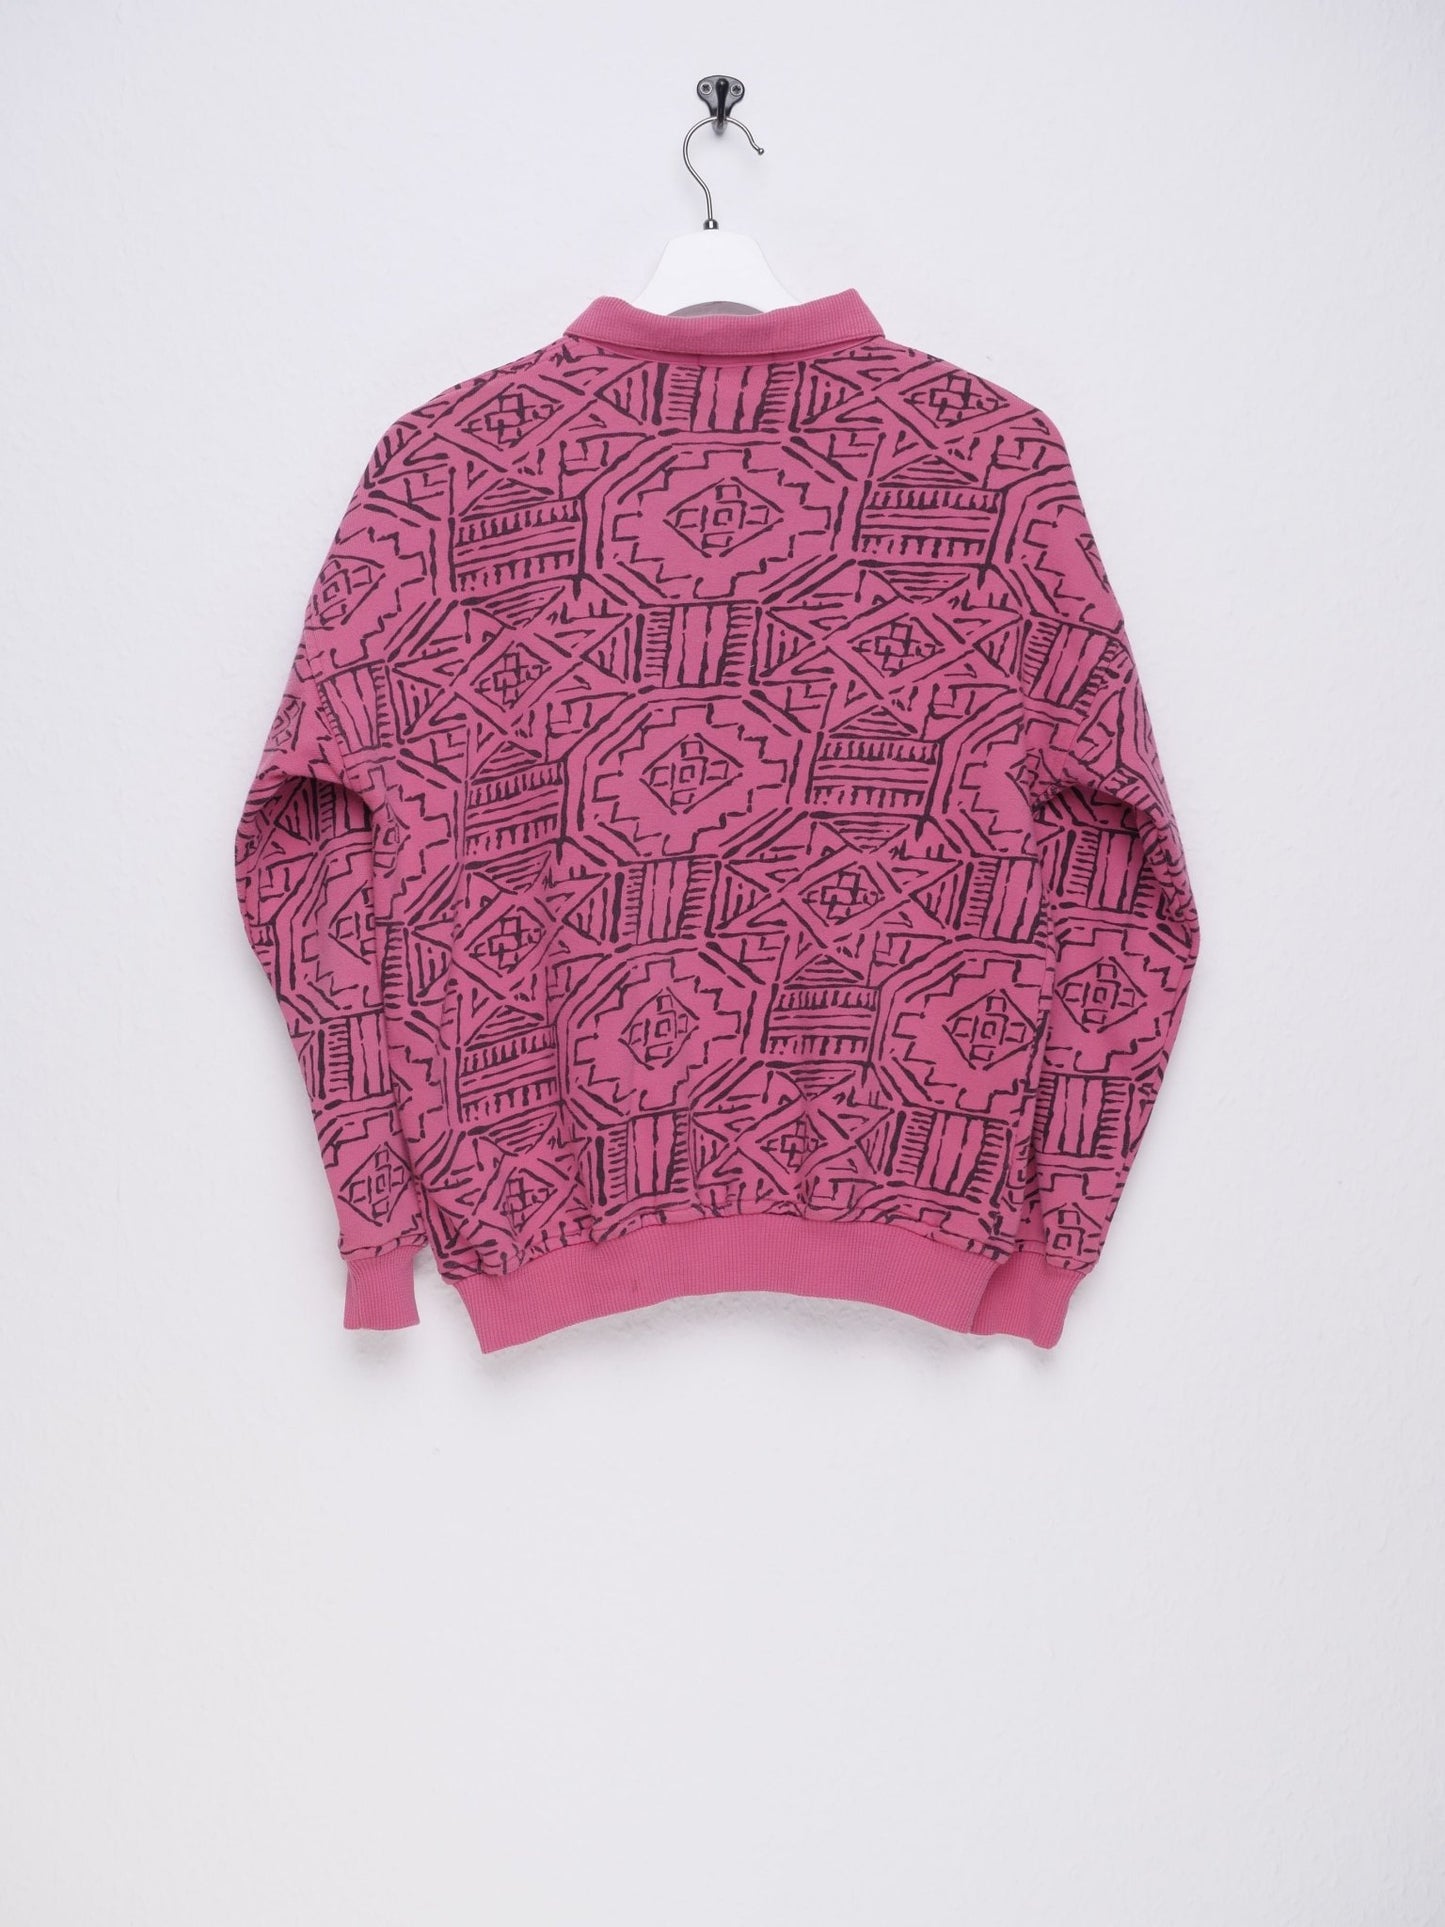 Vintage printed pattern pink L/S Polo Sweater - Peeces